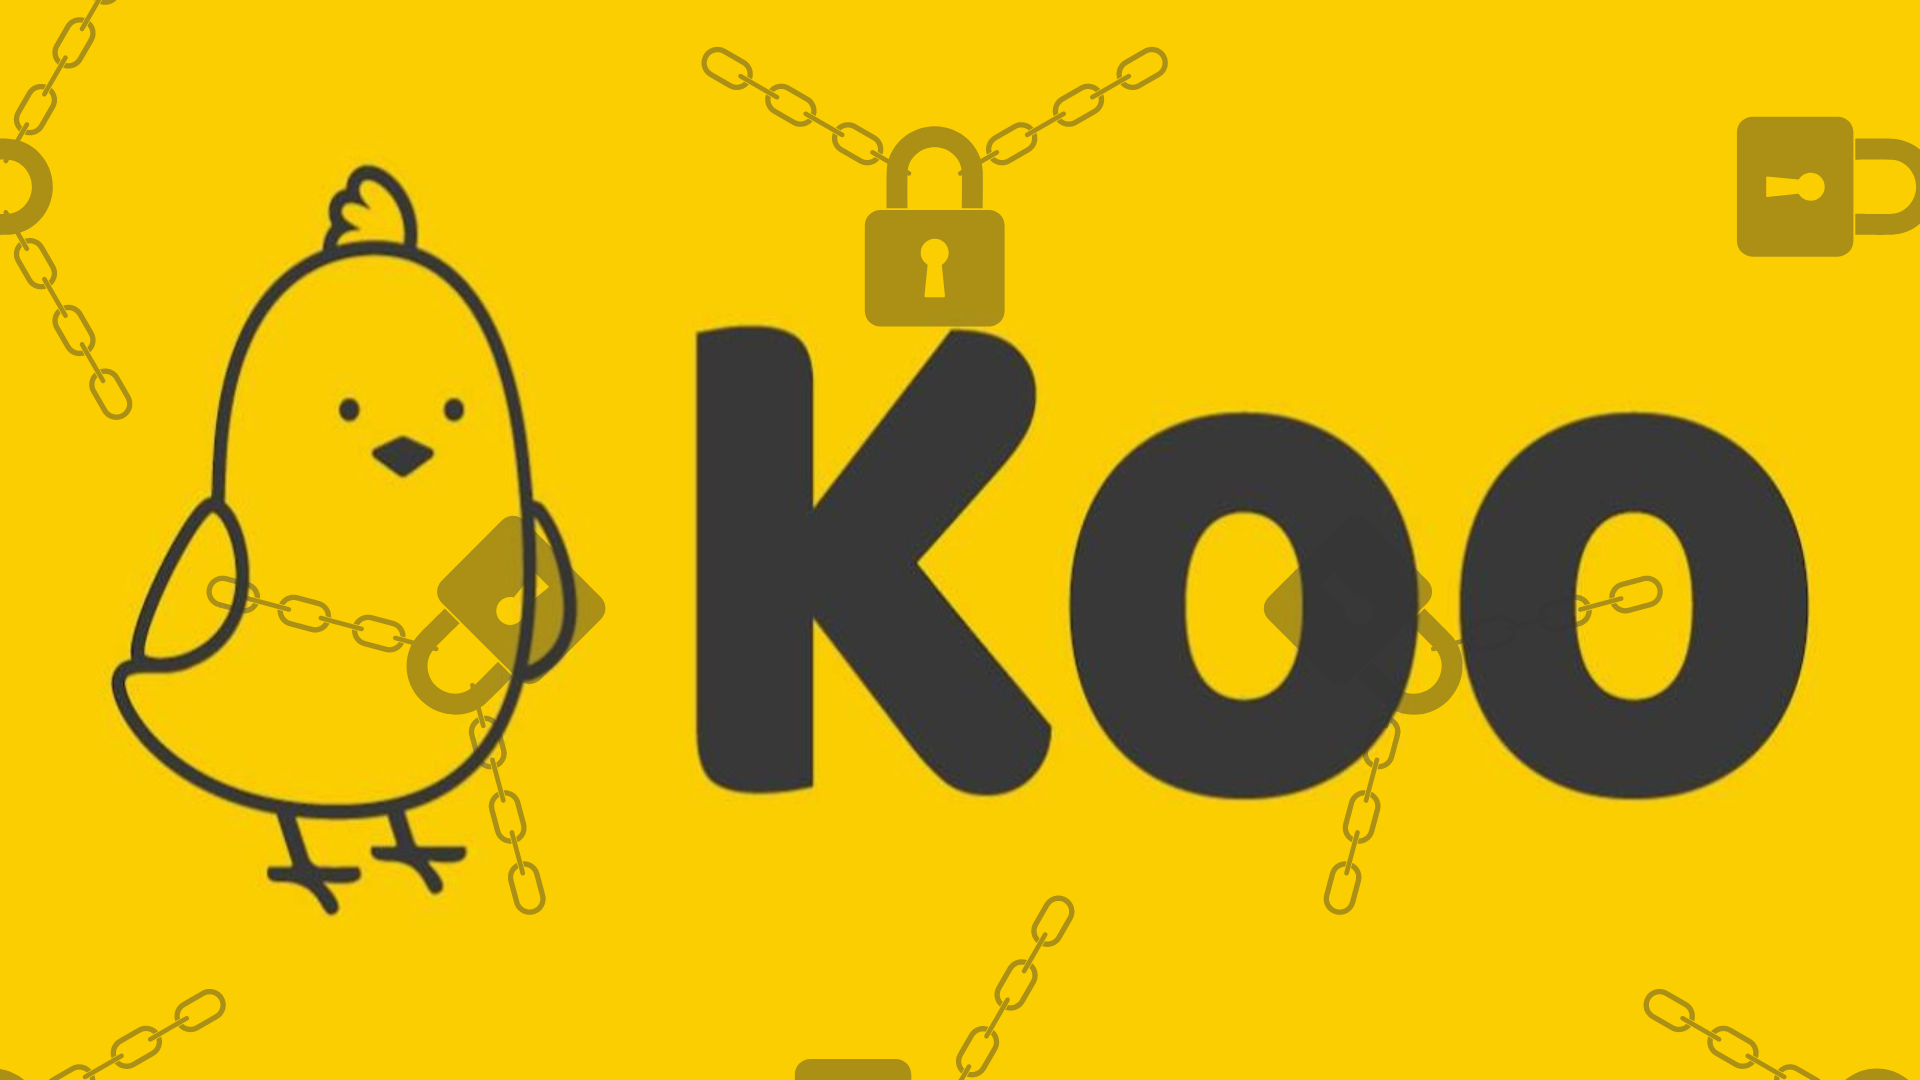 Indian Twitter Rival Koo Who Once Boasted 2.1 Million Daily Active Users Is Now SHUTTING DOWN- Here’s Why